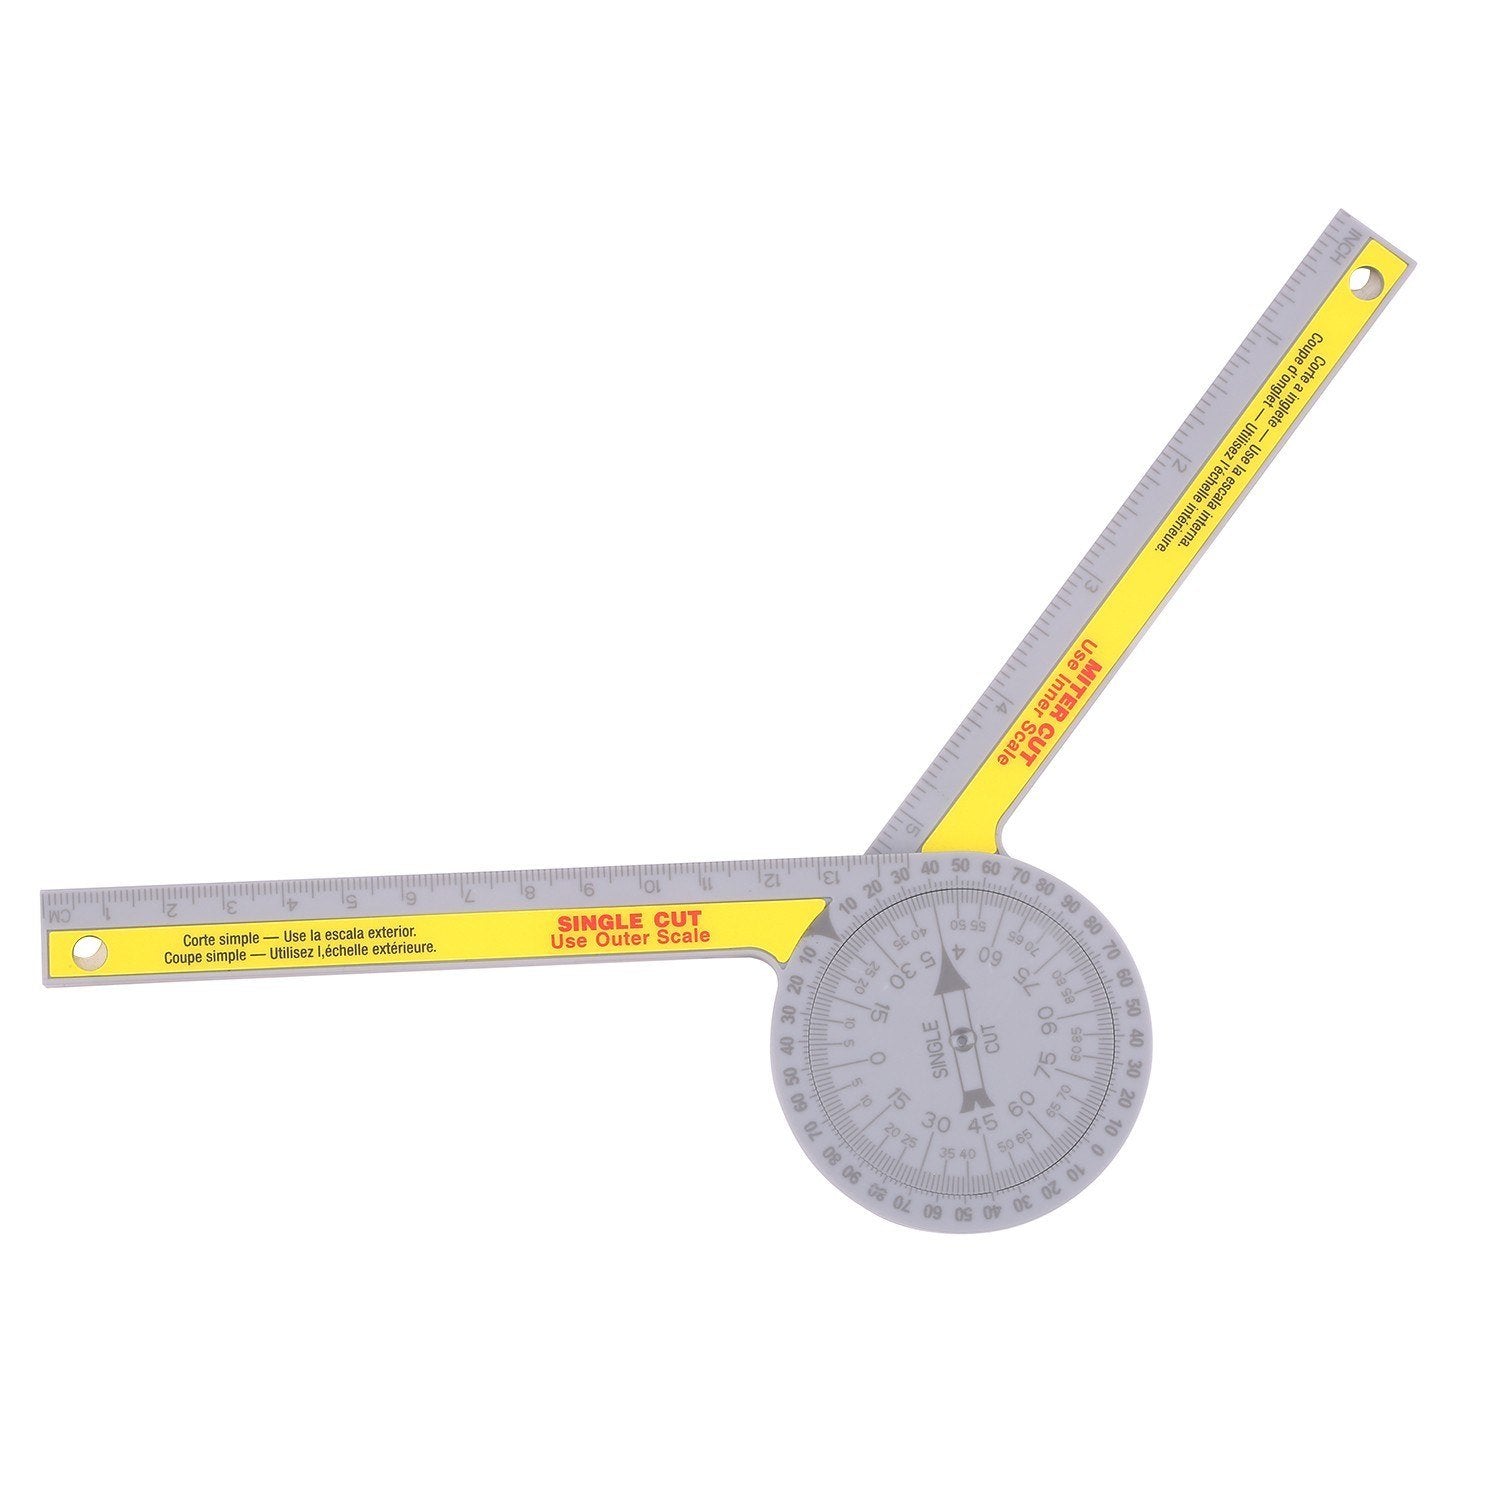 Miter Saw Protractor Angle Measuring Transfer Rule Gauge for Carpenters ABS Metric Ruler